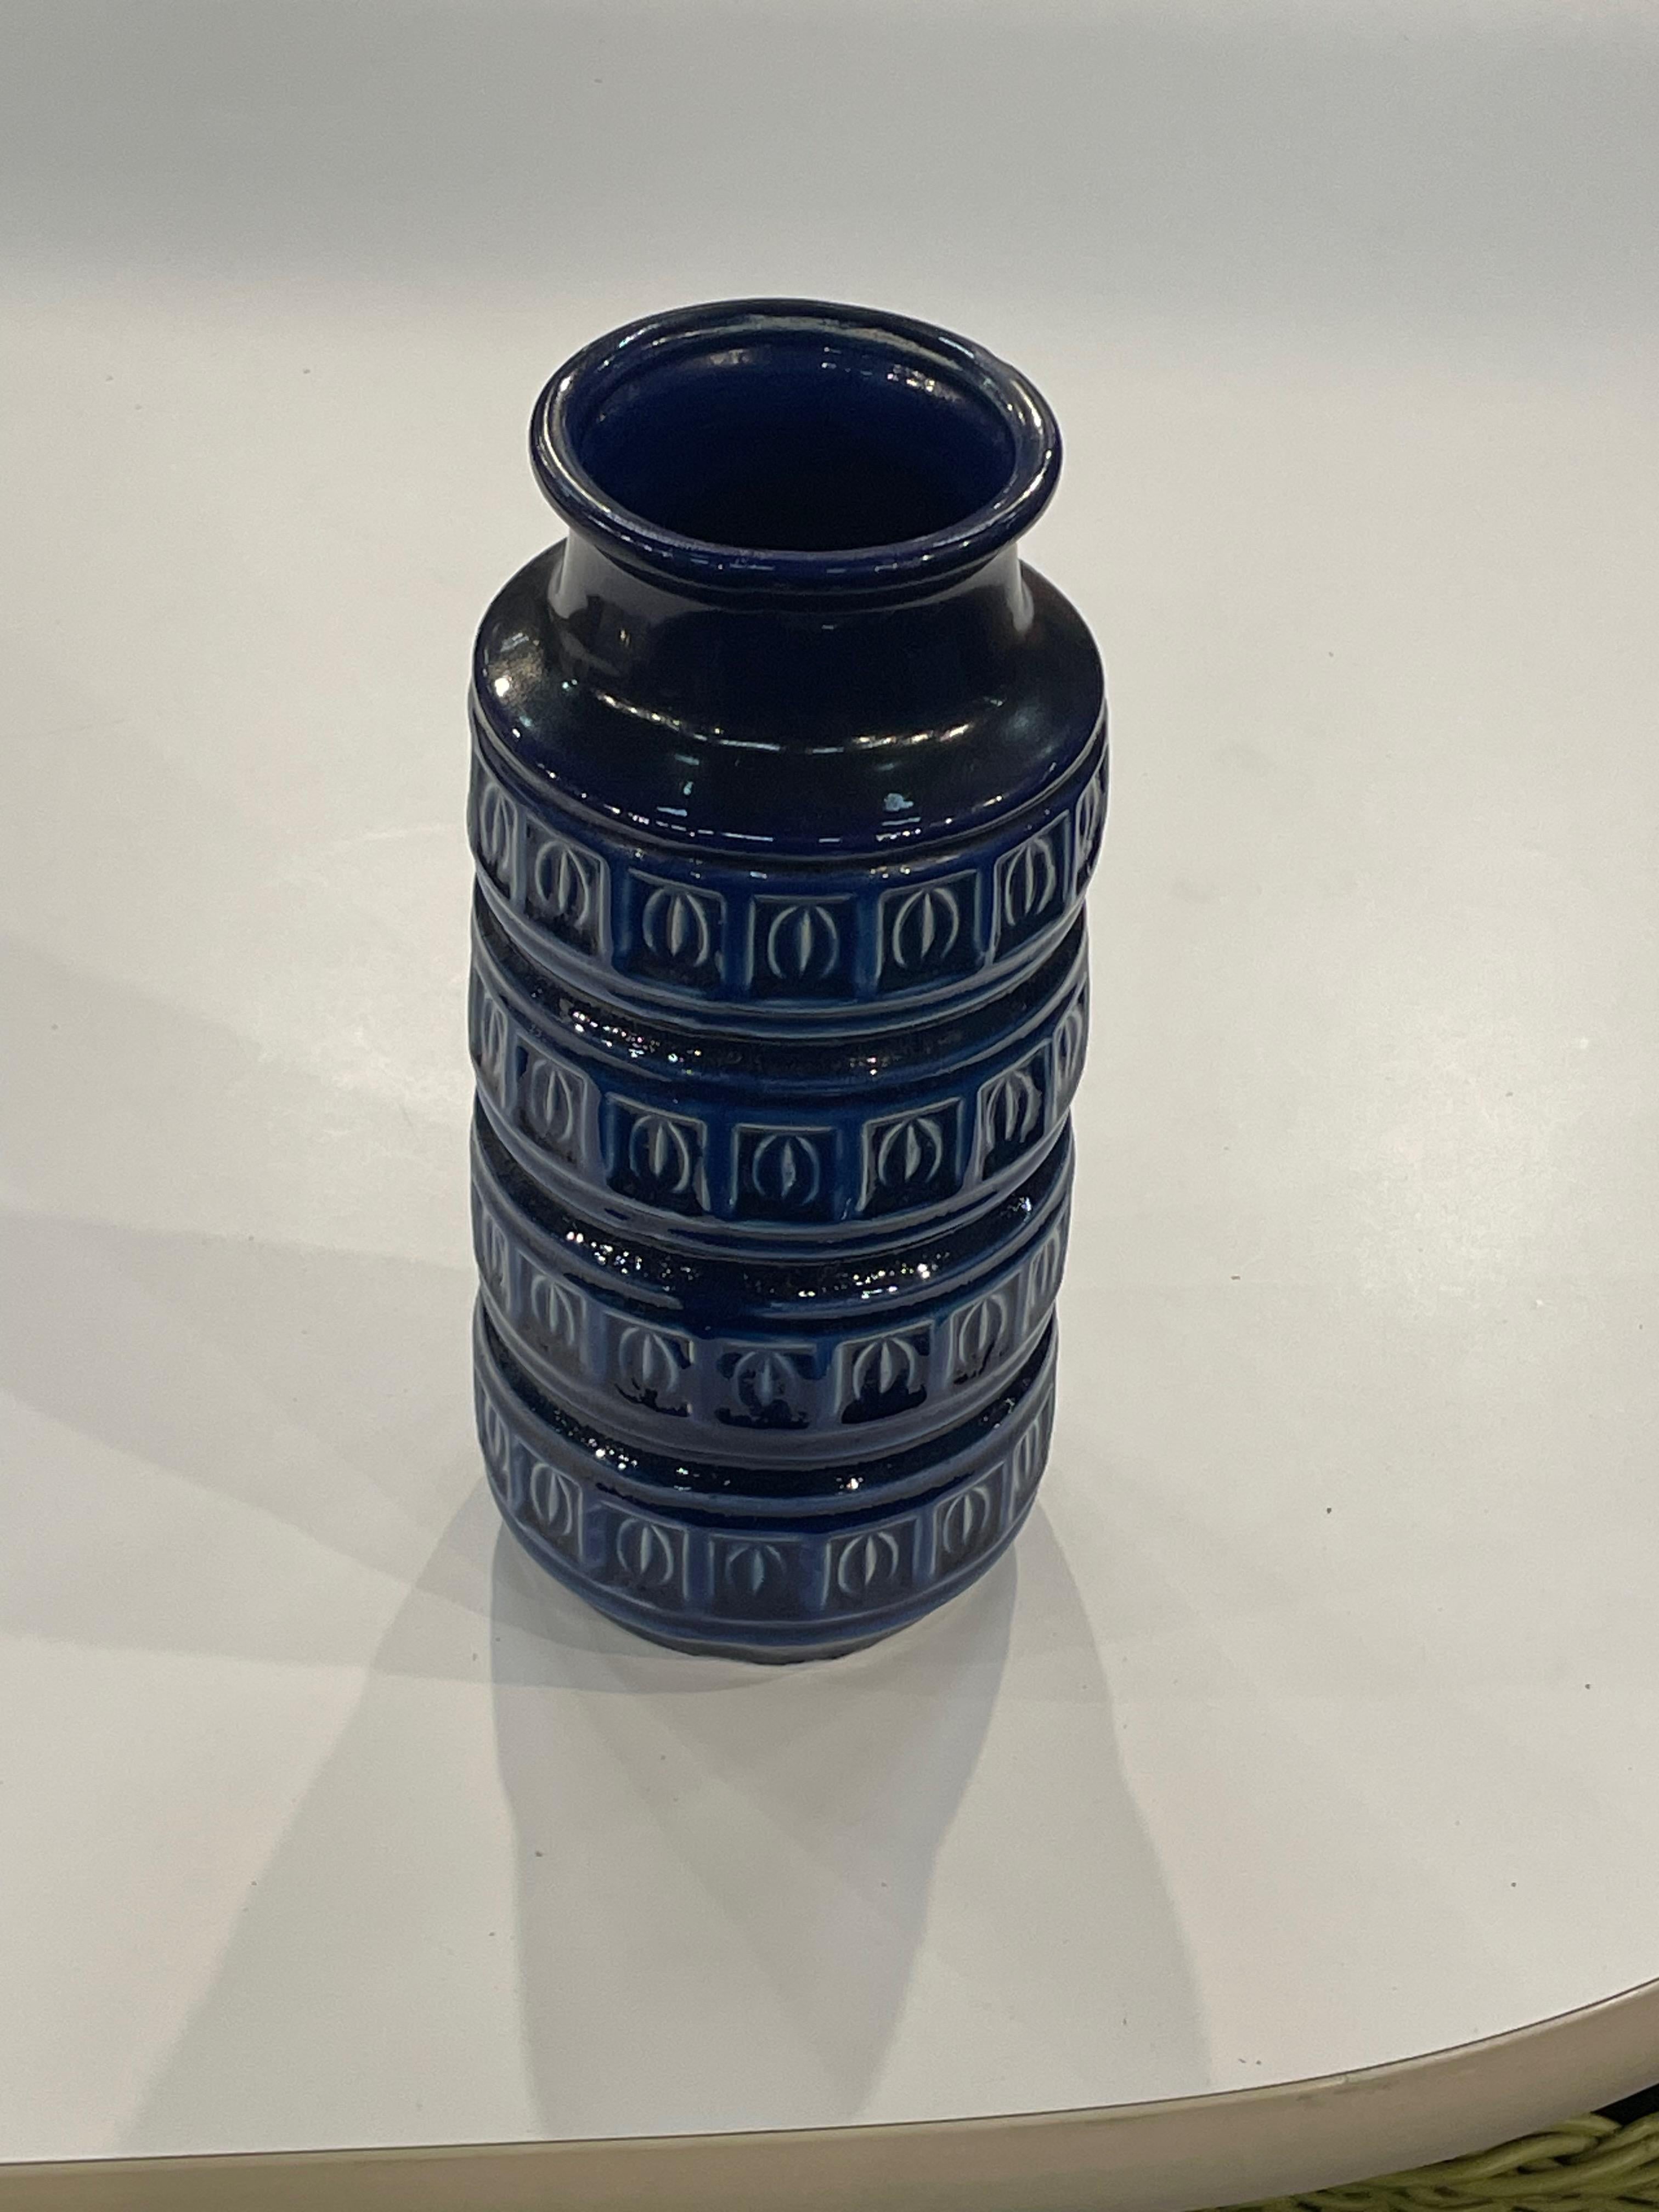 Mid Century German ceramic vase with horizontal bands of raised geometric design.
Cobalt blue in color.
Can hold water.
Sits well with S6756 and S6757.
ARRIVING APRIL